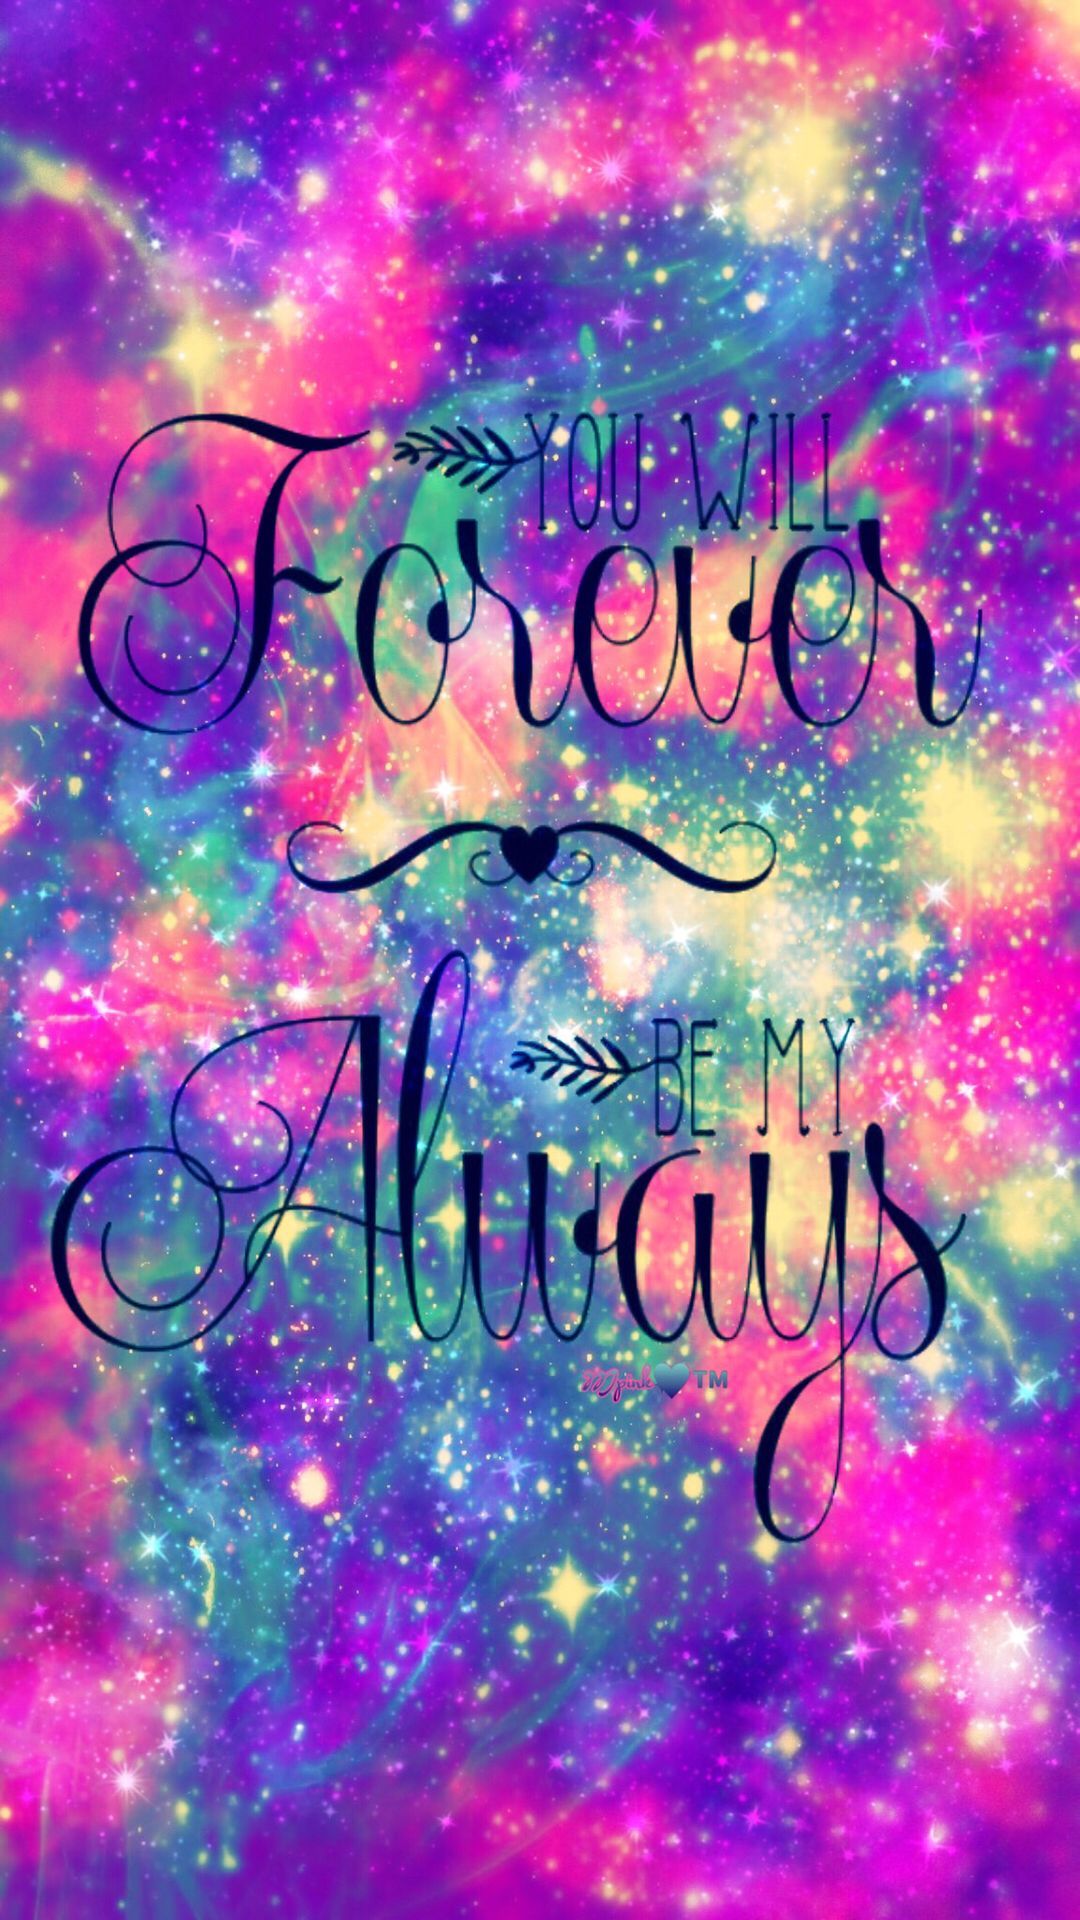 Always And Forever Wallpapers Wallpaper Cave